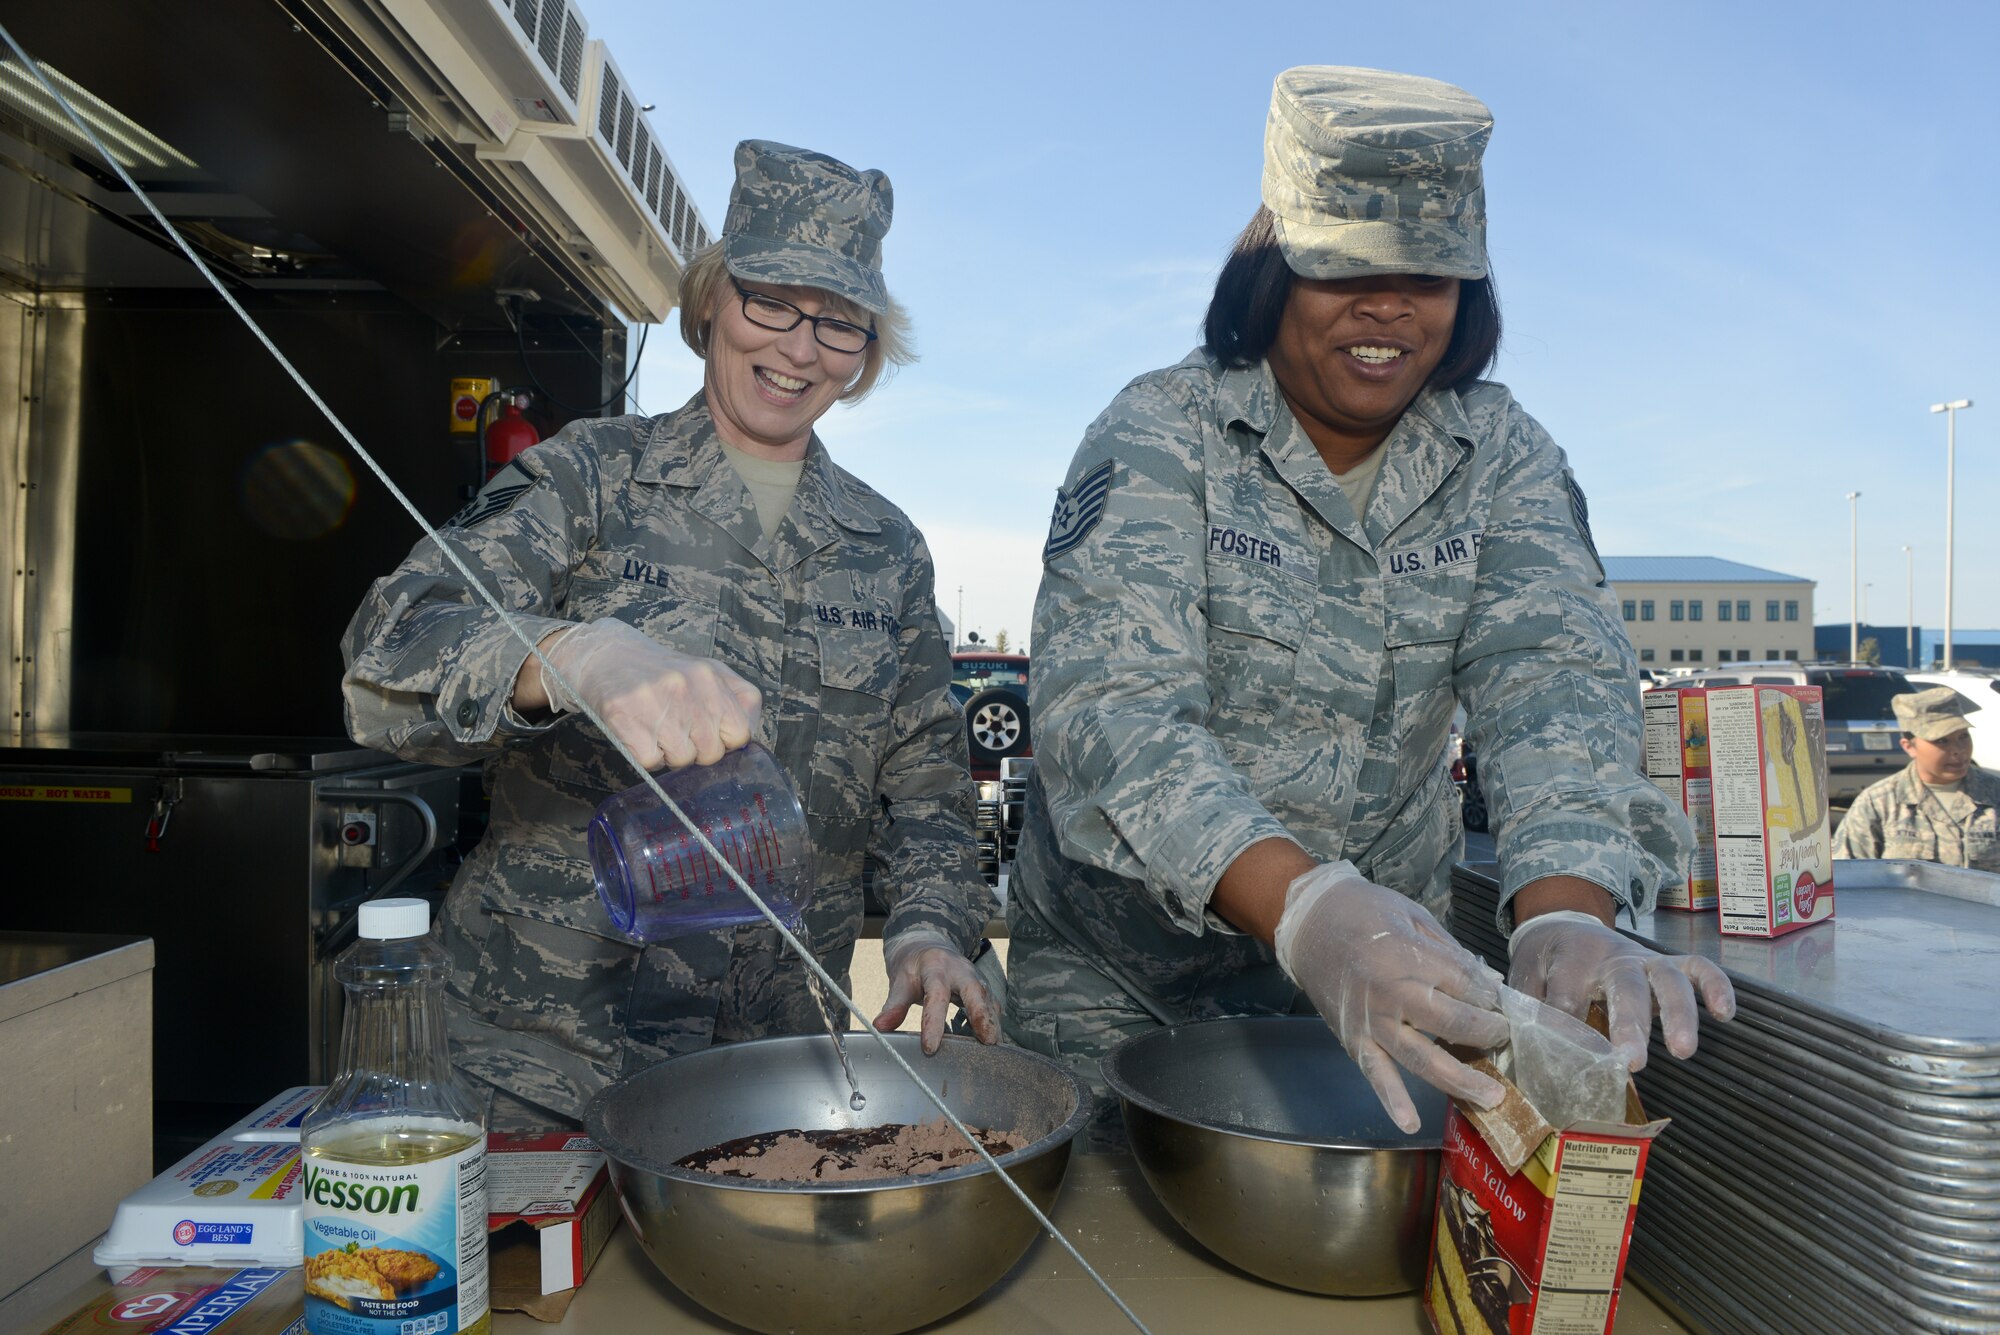 U.S. Air Force Master Sgt. Elisa Lyle, left, and Tech. Sgt. Jocelyn Foster, 116th Force Support Squadron, Services Flight (FSS/FSV), Georgia Air National Guard, Robins Air Force Base, Ga., mix ingredients in preparation for baking a cake in a Deployable Ready Mobile Kitchen Trailer (DRMKT) while training with the 136th FSS/FSV, Texas Air National Guard, at Naval Air Station Fort Worth Joint Reserve Base, Texas, Feb. 22, 2014. Members of the 116th FSS/FSV participated in the two-day training event in anticipation of receiving their own DRMKT in July 2014. (U.S. Air National Guard photos by Master Sgt. Charles Hatton/Released)